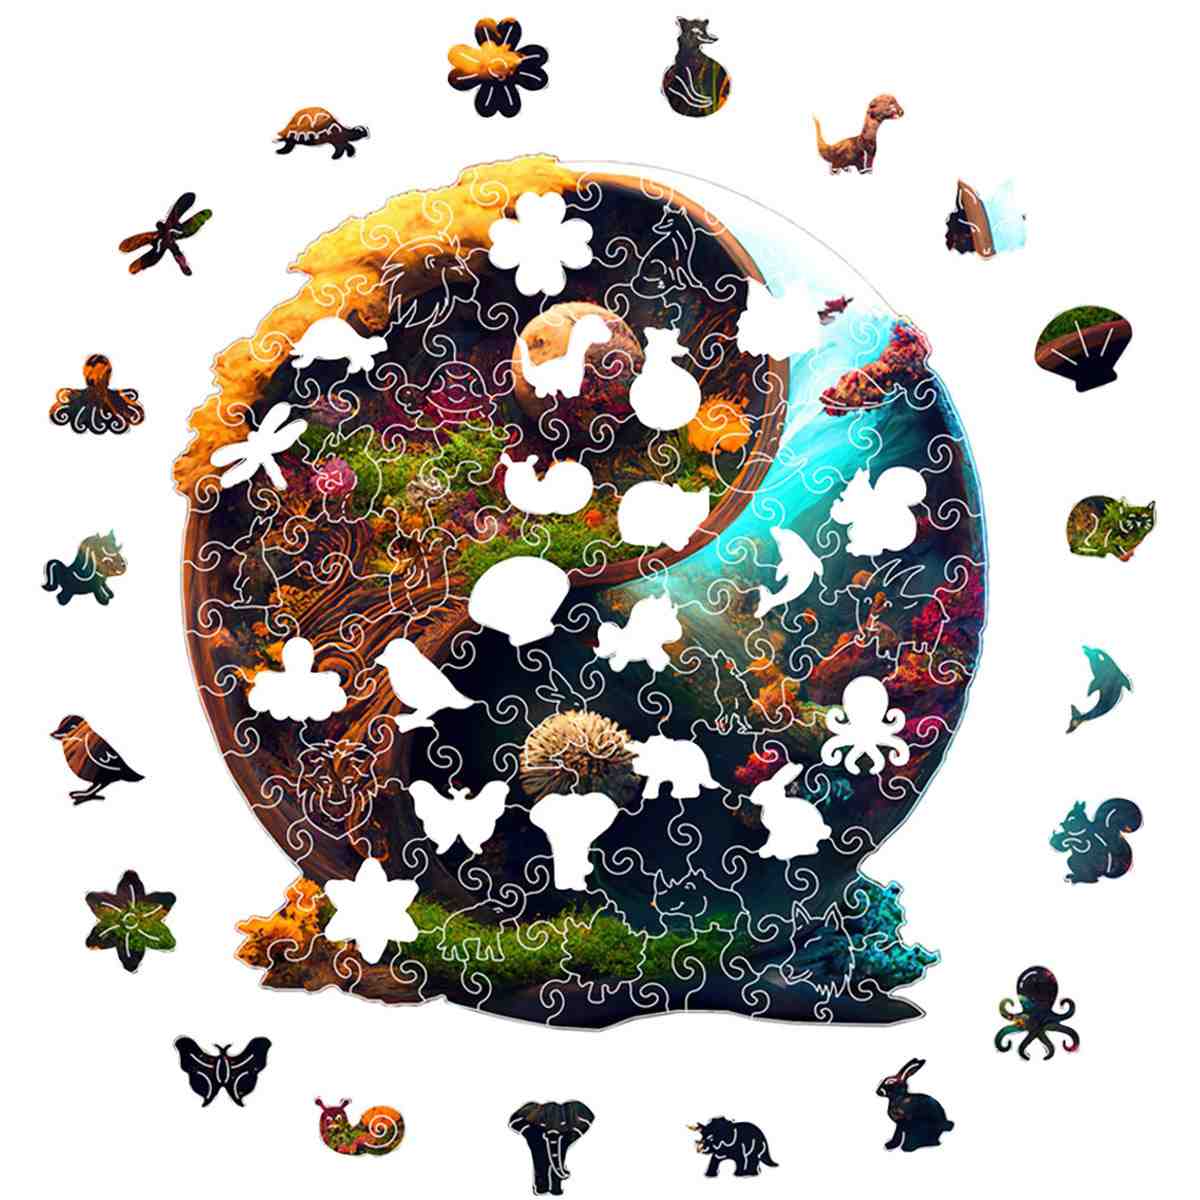 Magical Two Worlds Yin Yang - Wooden Jigsaw Puzzle